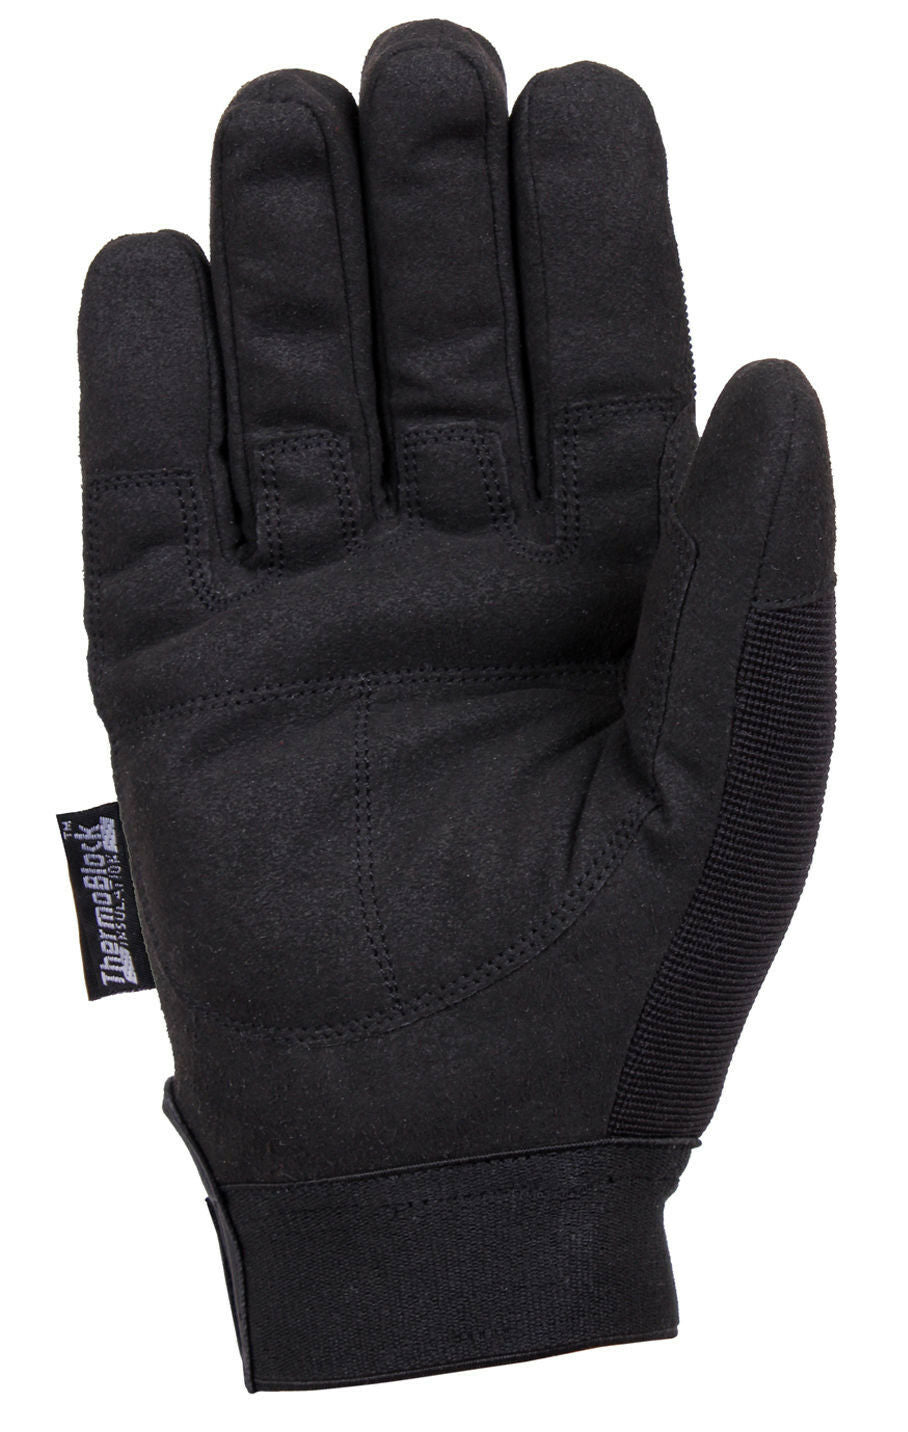 Rothco Cold Weather All Purpose Duty Gloves - Black